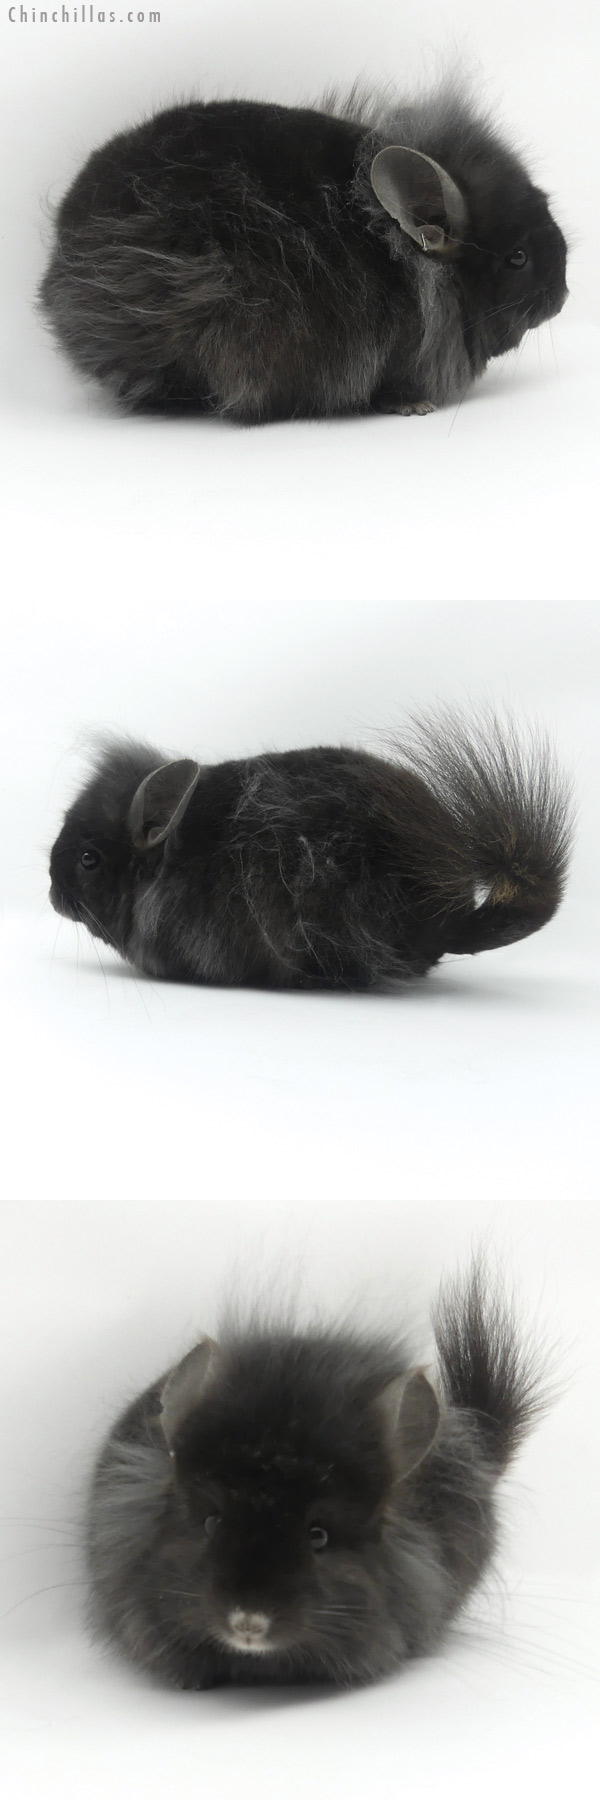 Chinchilla or related item offered for sale or export on Chinchillas.com - 19421 Exceptional Ebony G3  Royal Persian Angora Female Chinchilla